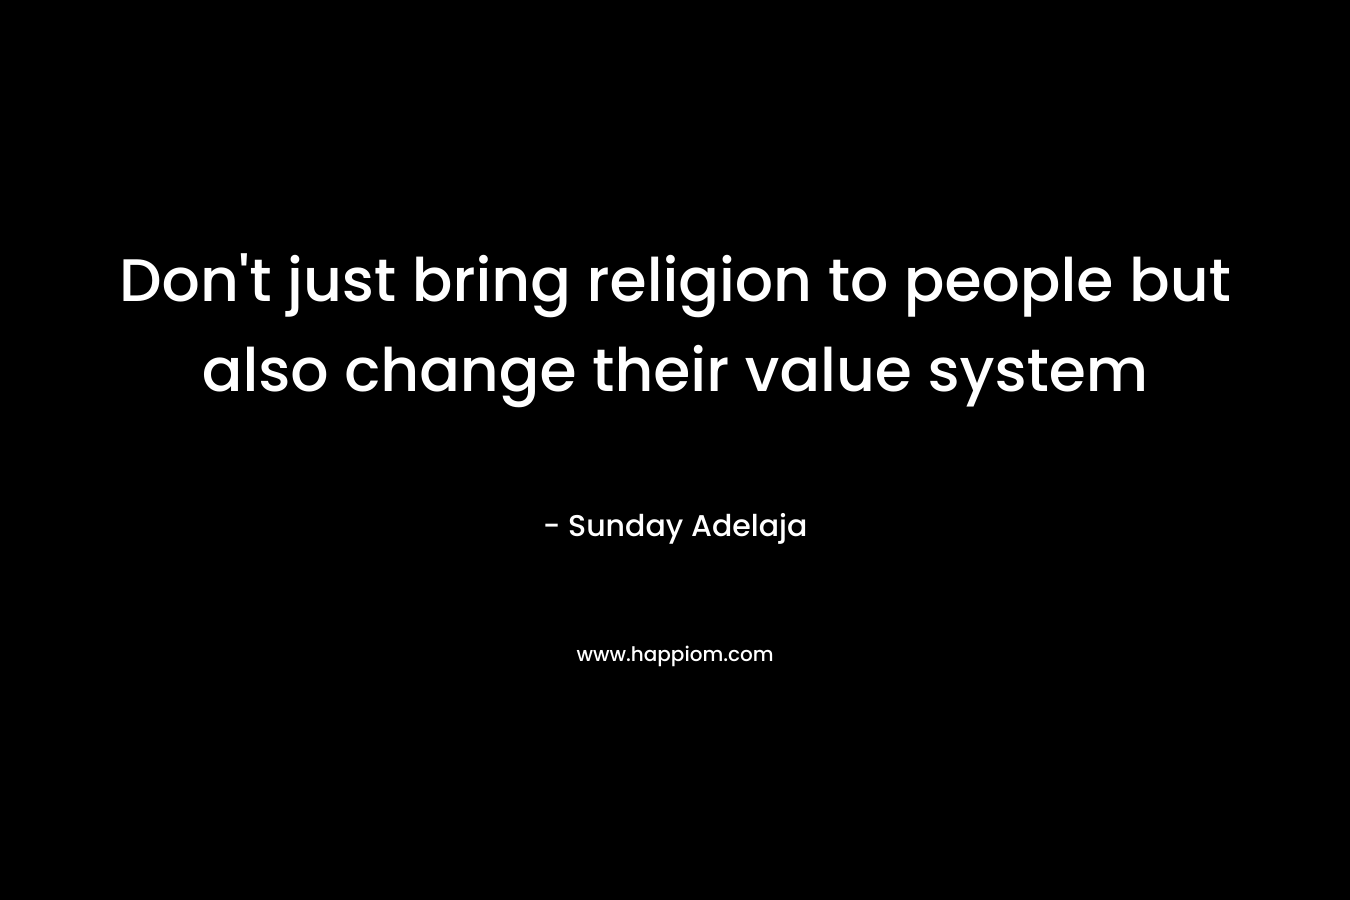 Don't just bring religion to people but also change their value system